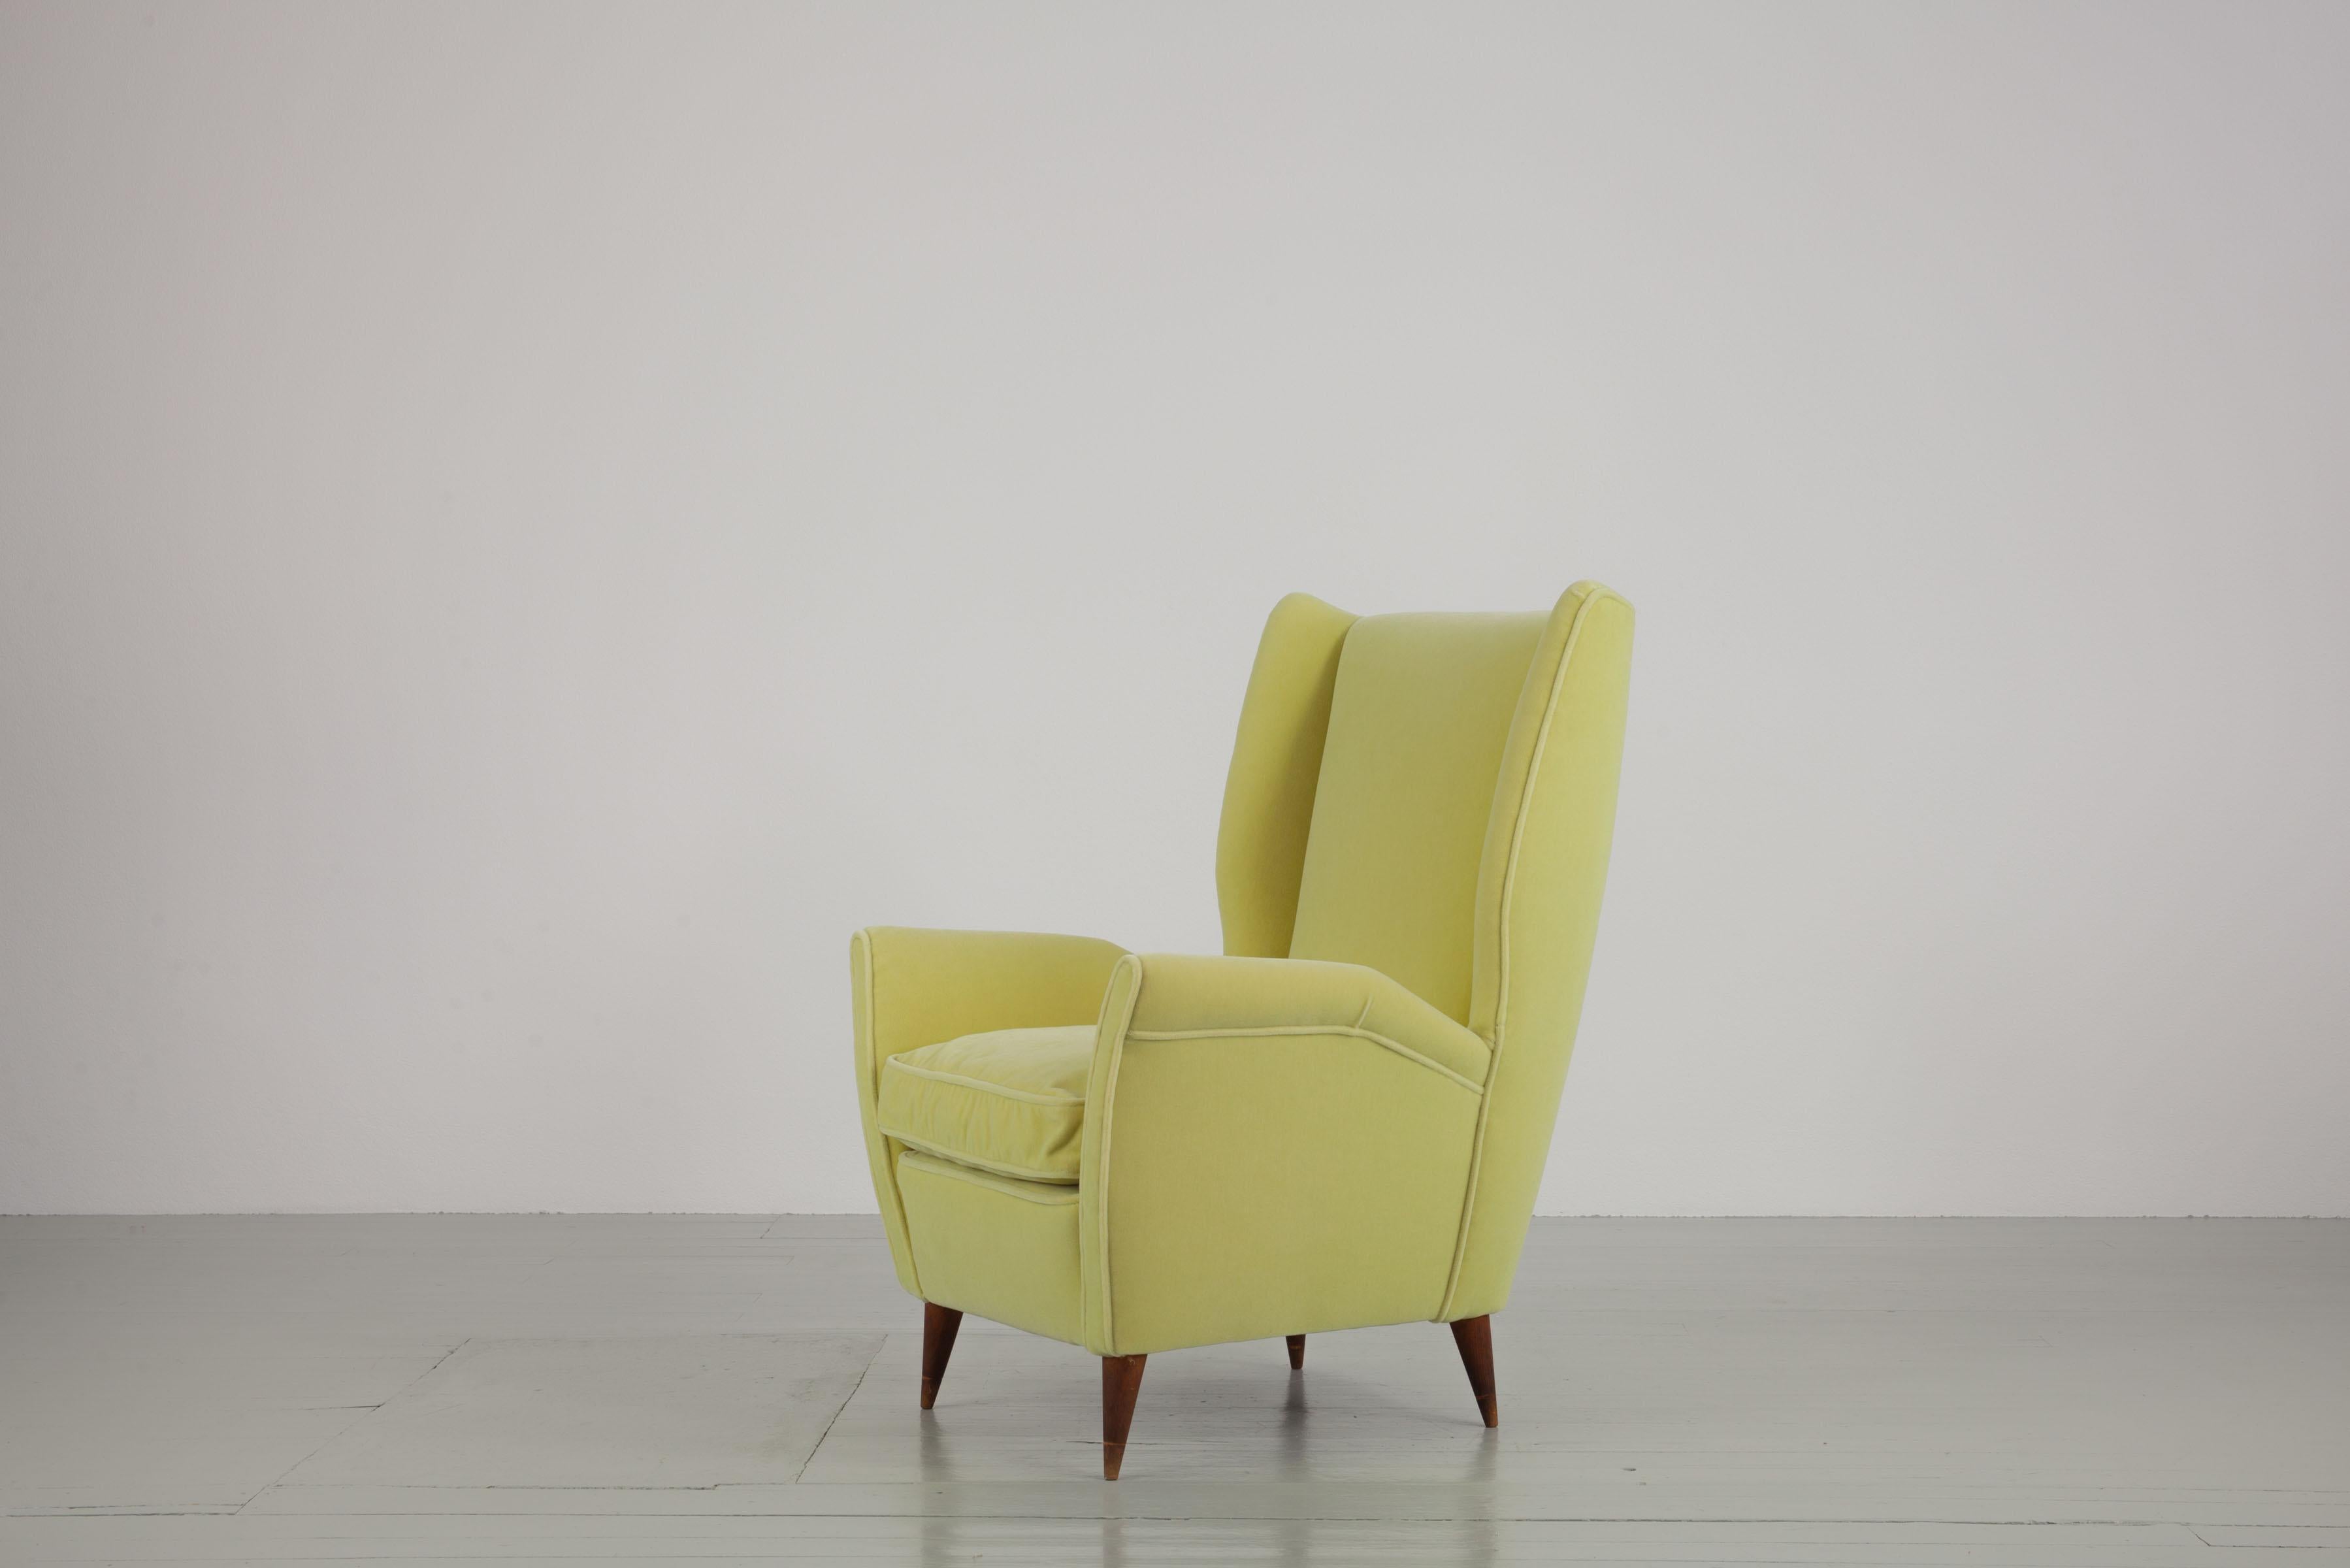 Italian Yellow Wingback Chair, Produced by I.S.A. Bergamo, 1950s For Sale 3